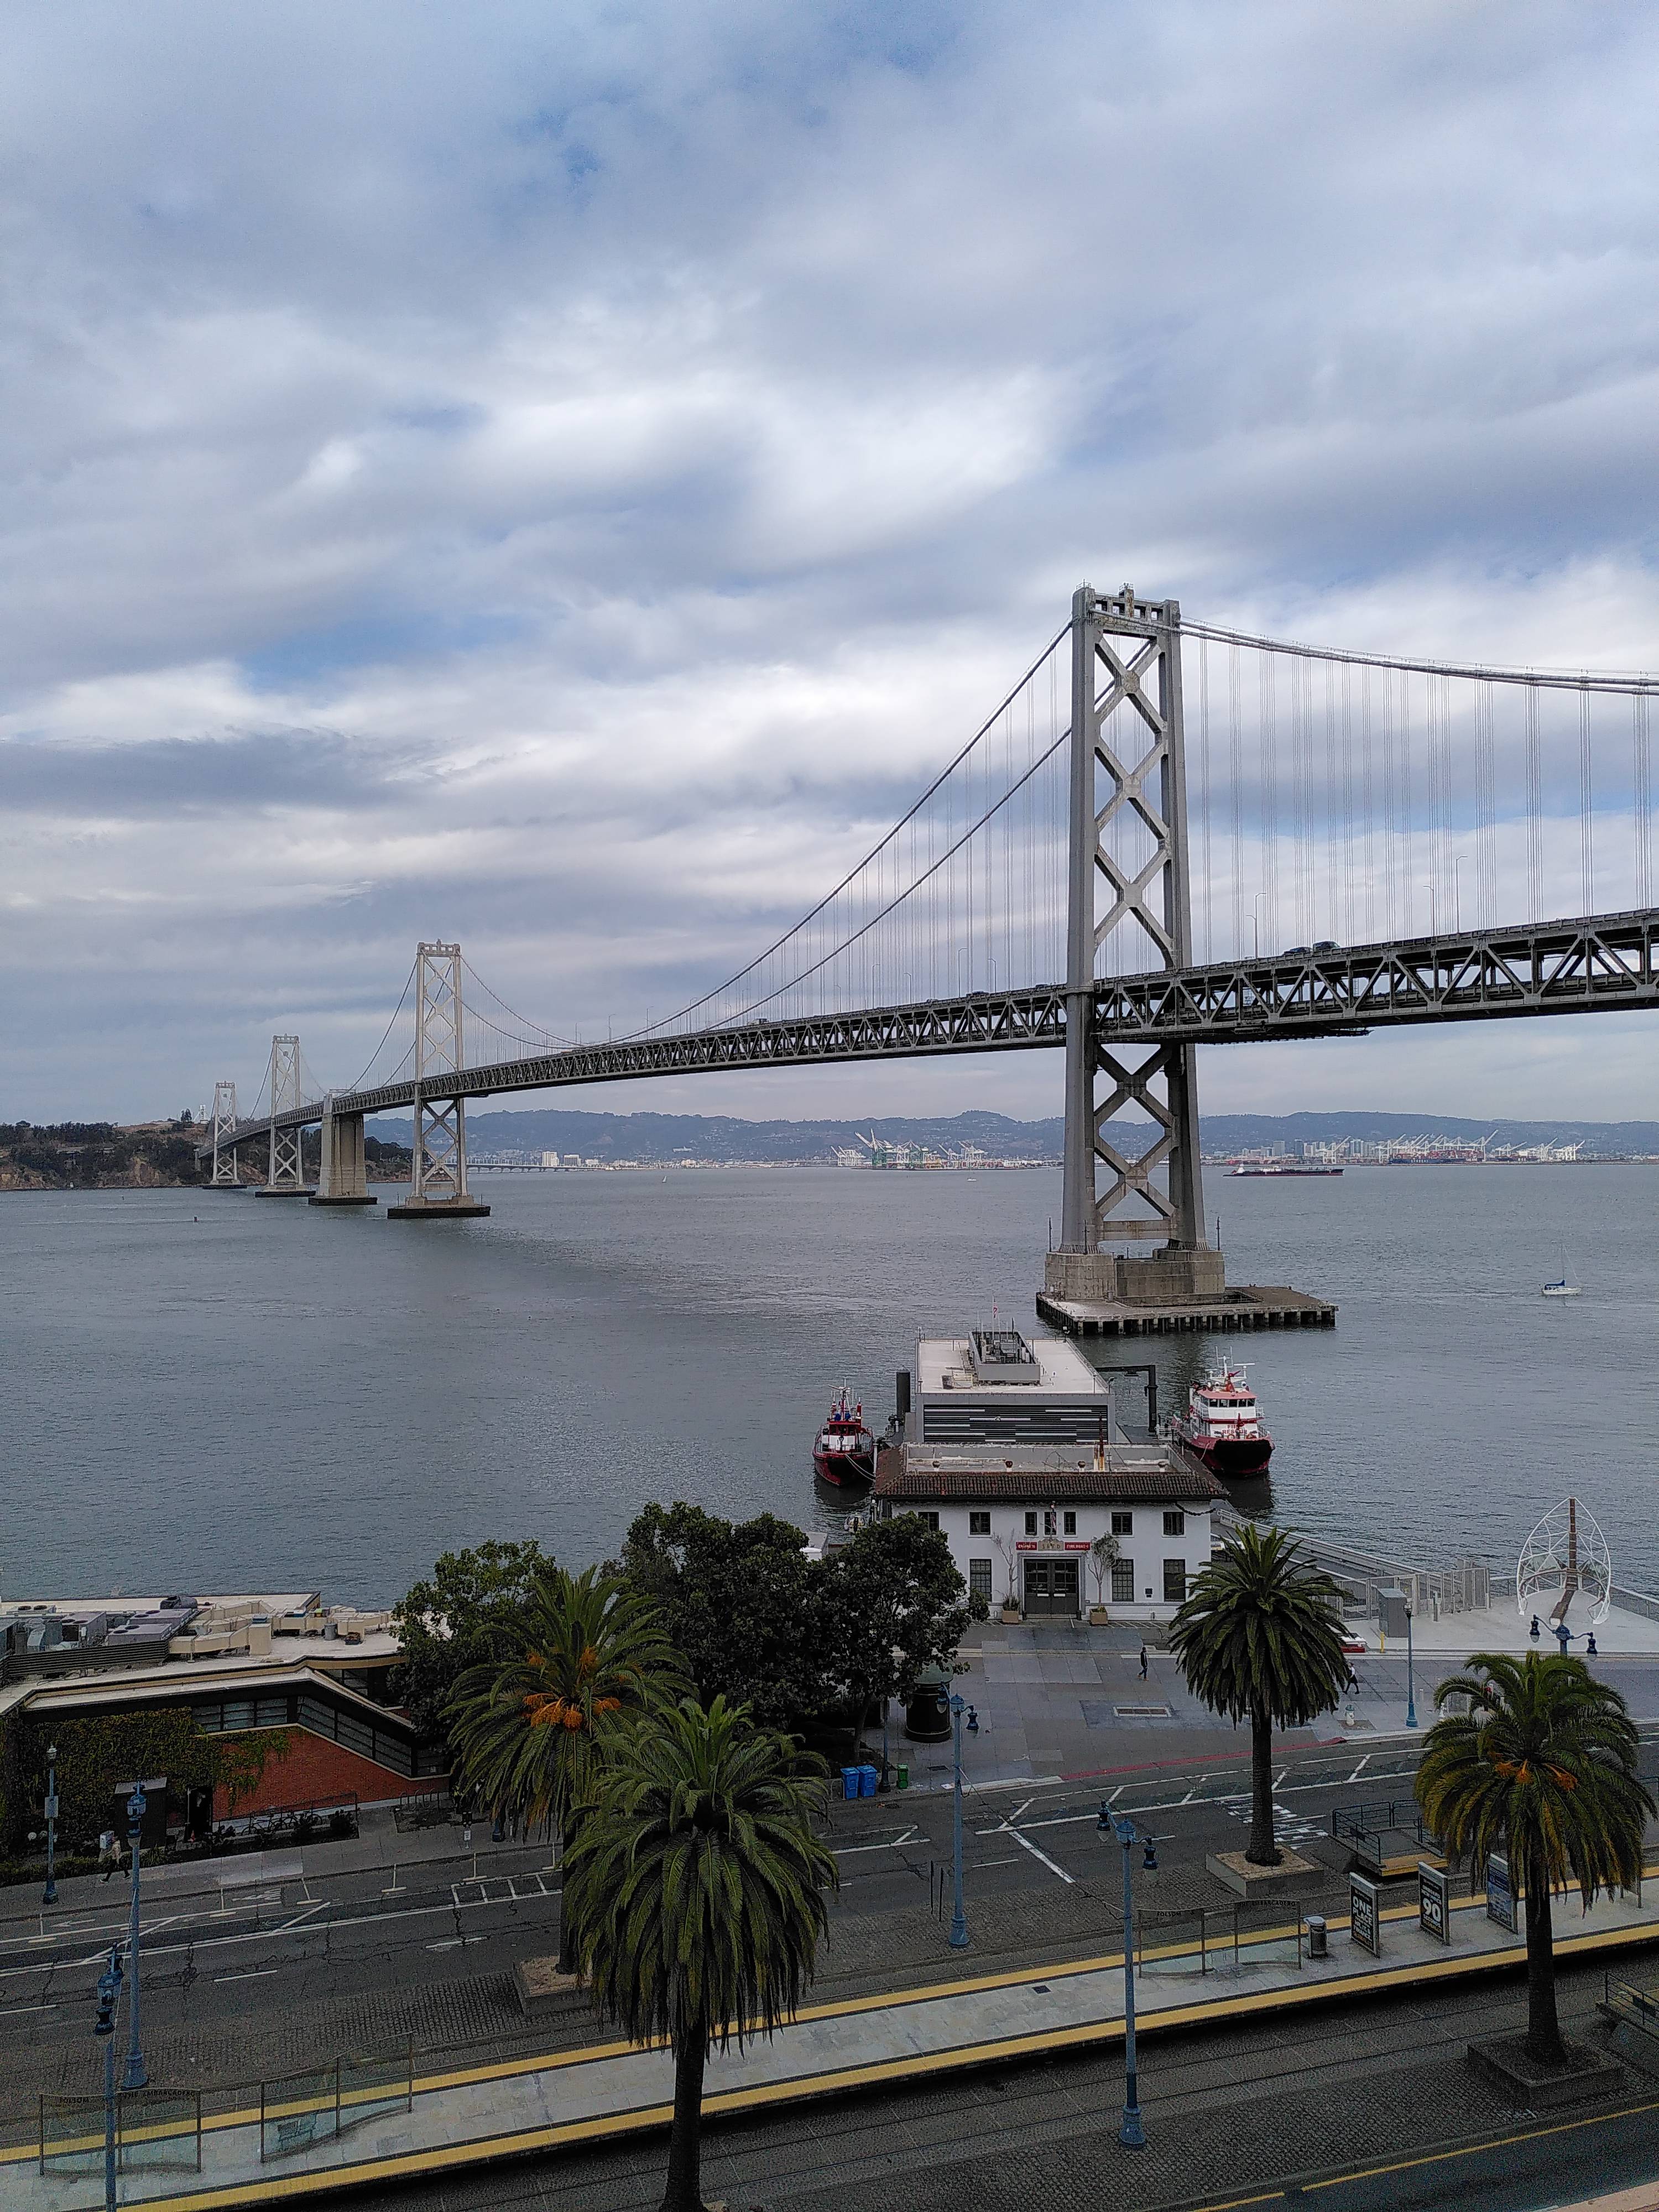 View of the Bay Bridge and a lot of water, as seen from a terrace high above street level.